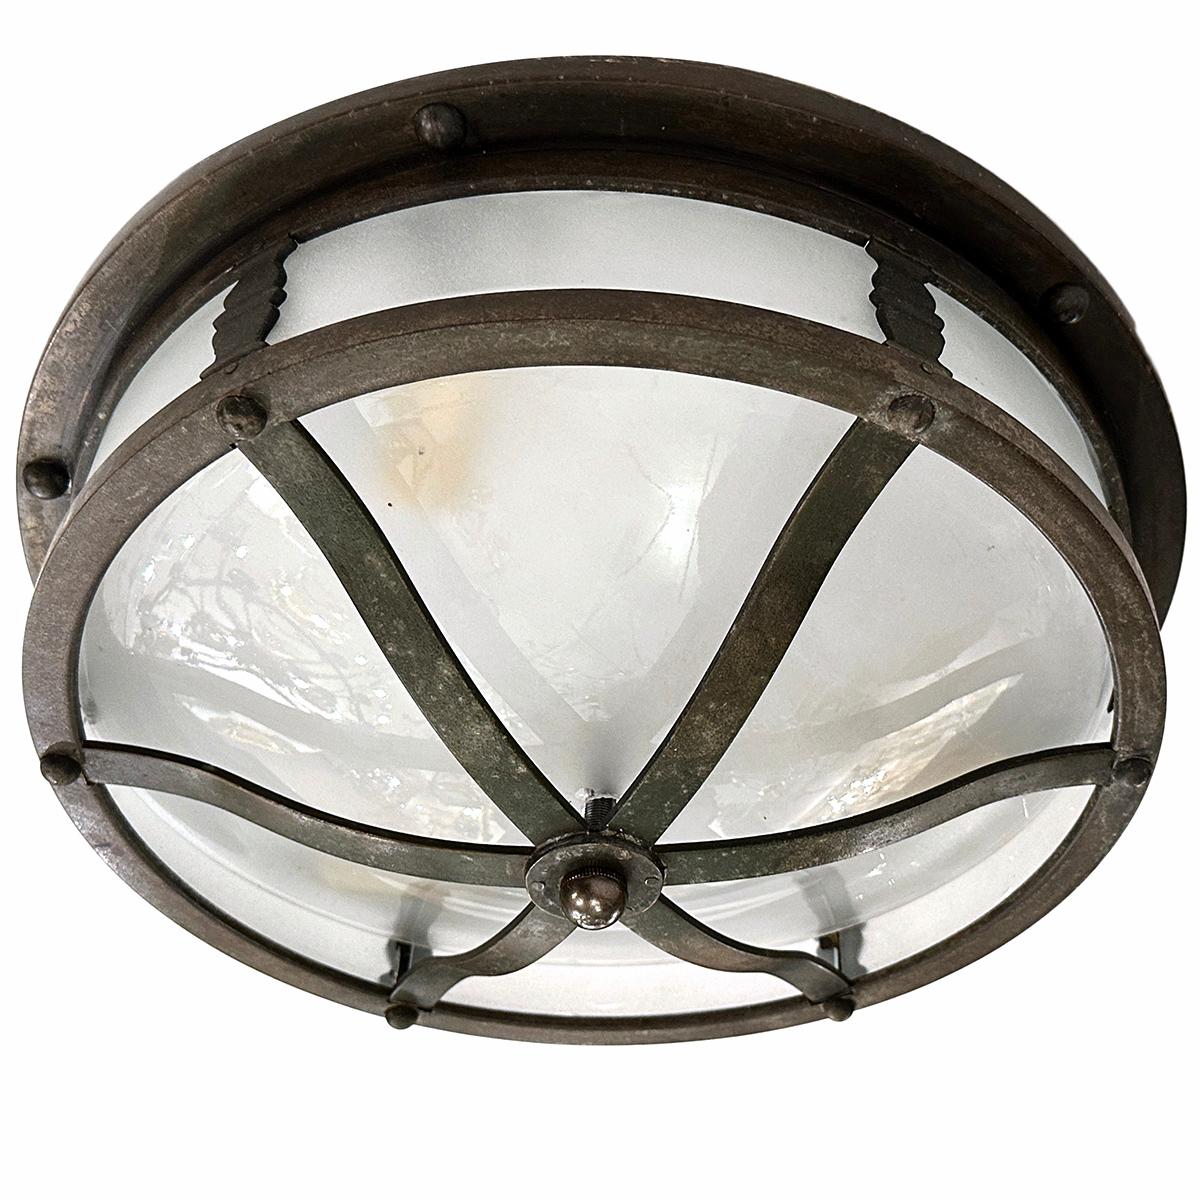 An English patinated bronze light fixture with frosted glass. 

Measurements:
Diameter: 14